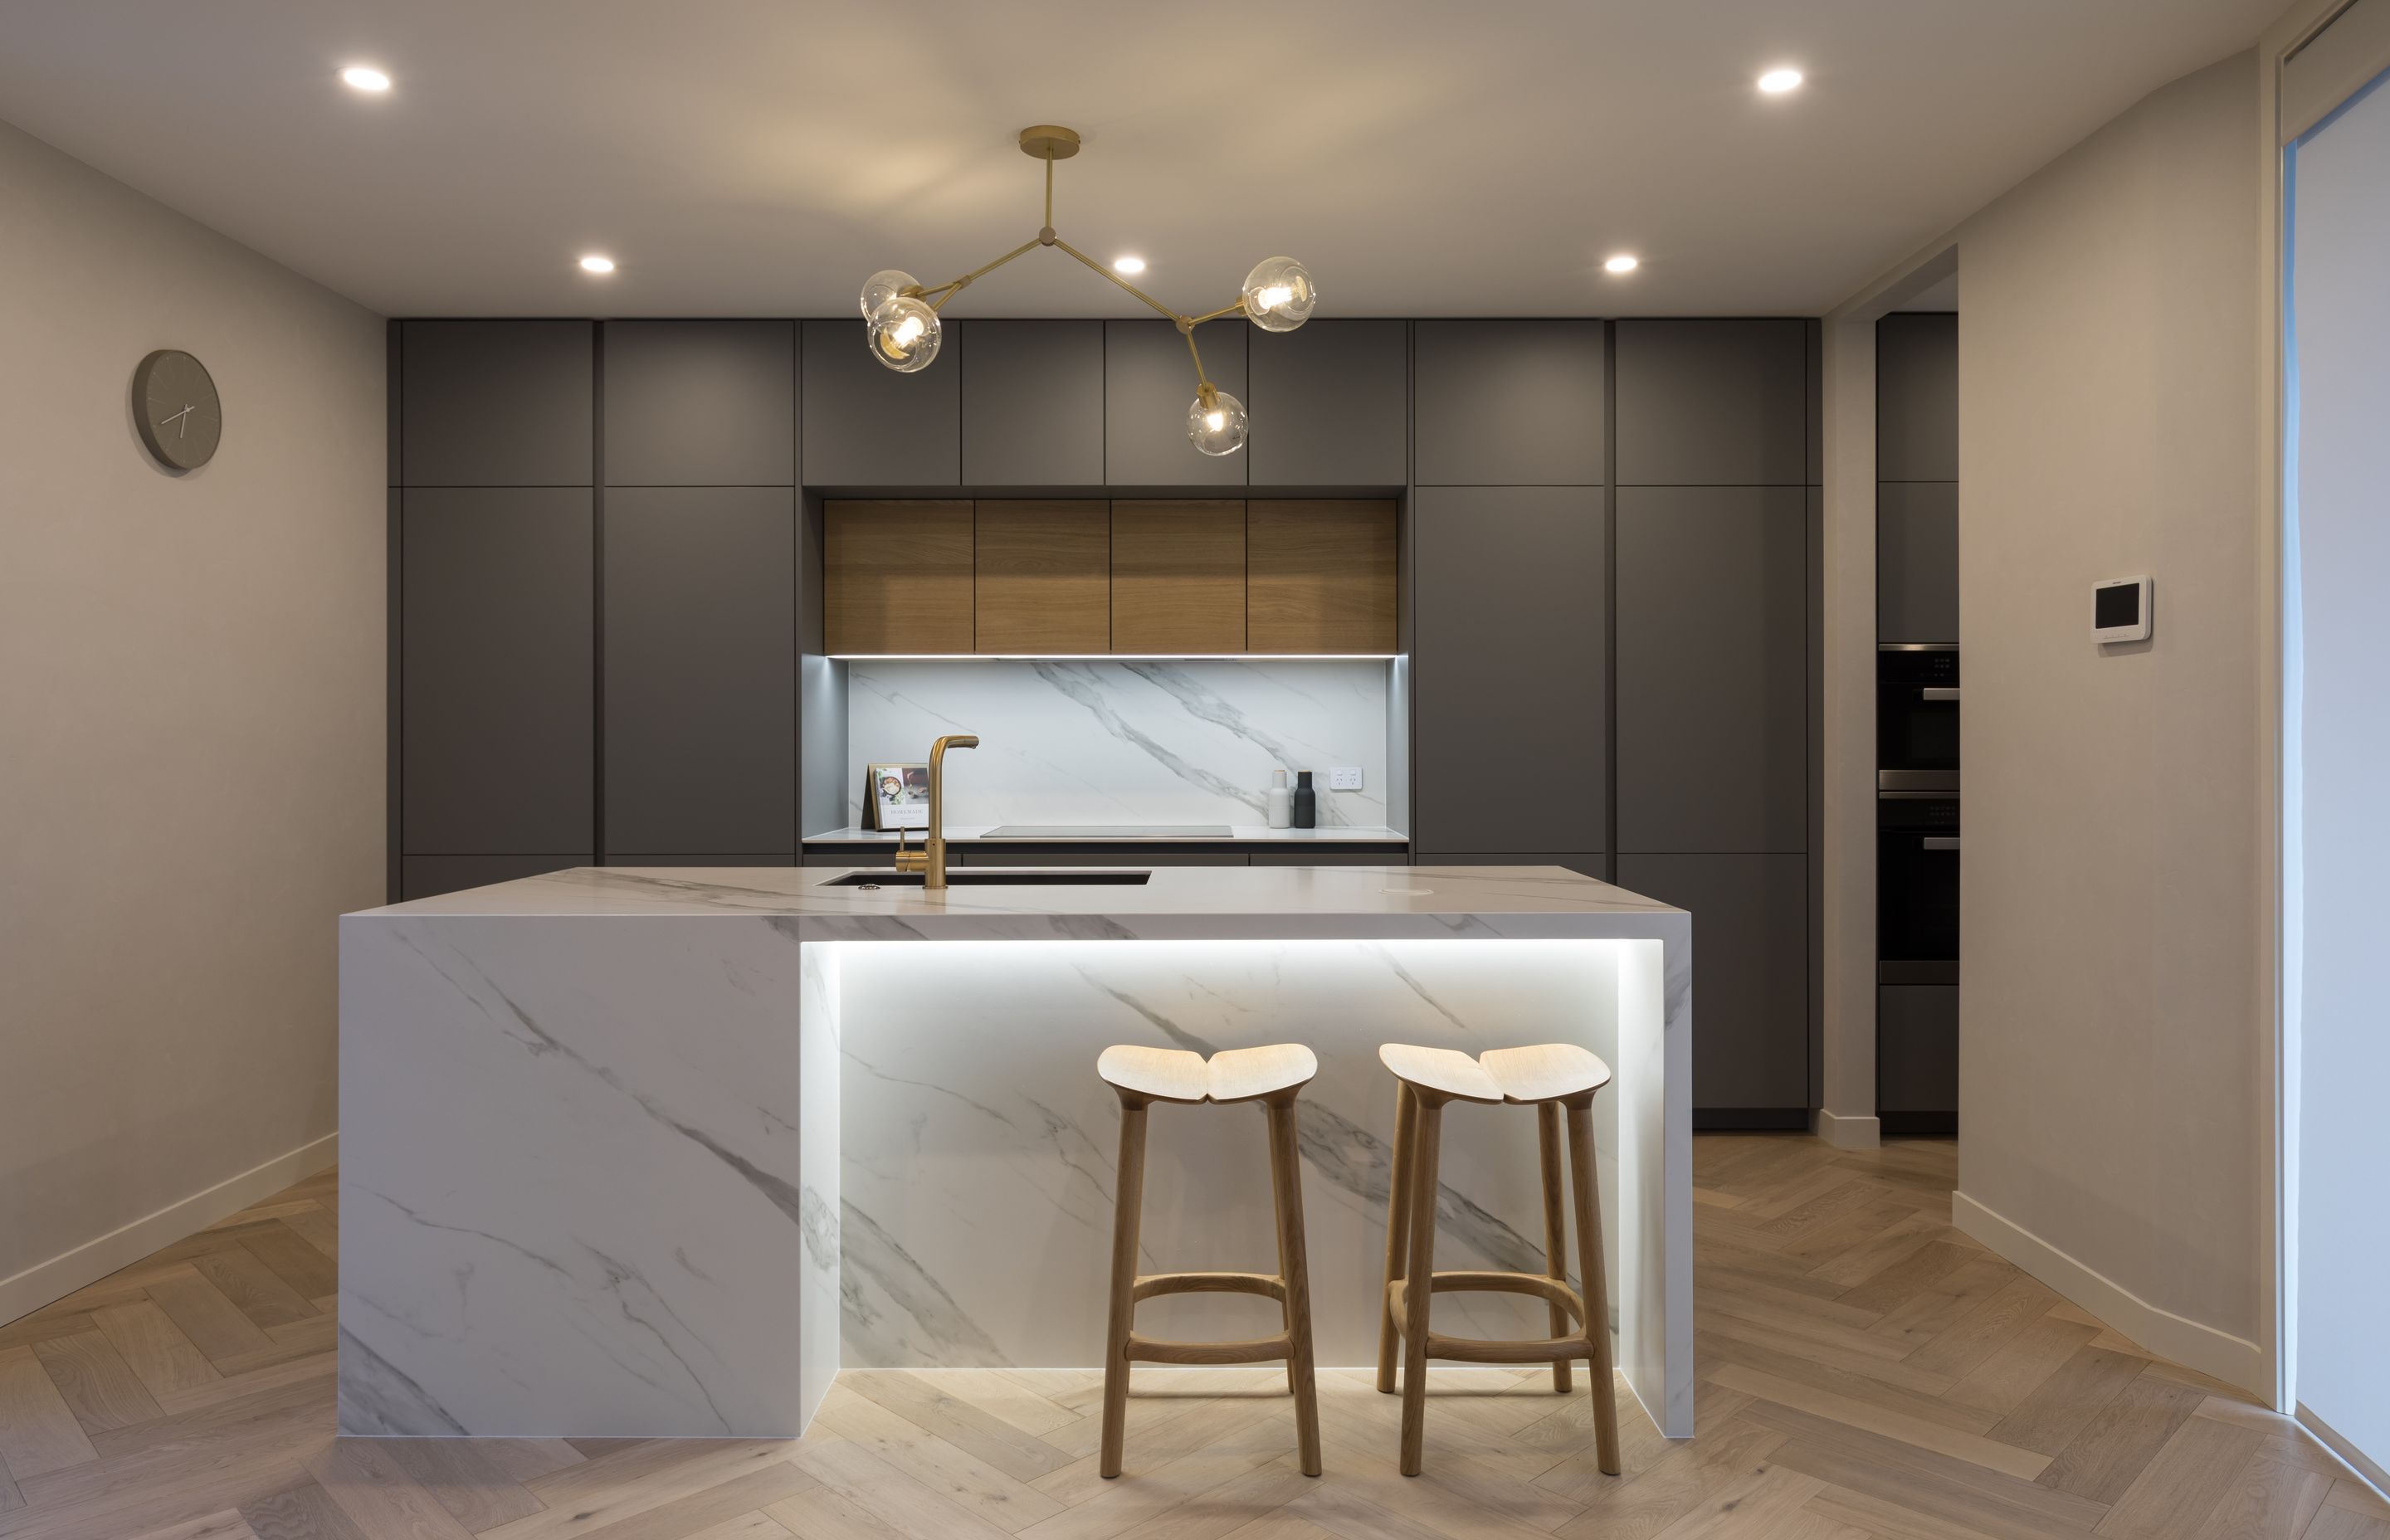 Designed by Poggenpohl designer Lara Farmilo, this award-winning kitchen features a palette of restrained yet sophisticated materials.